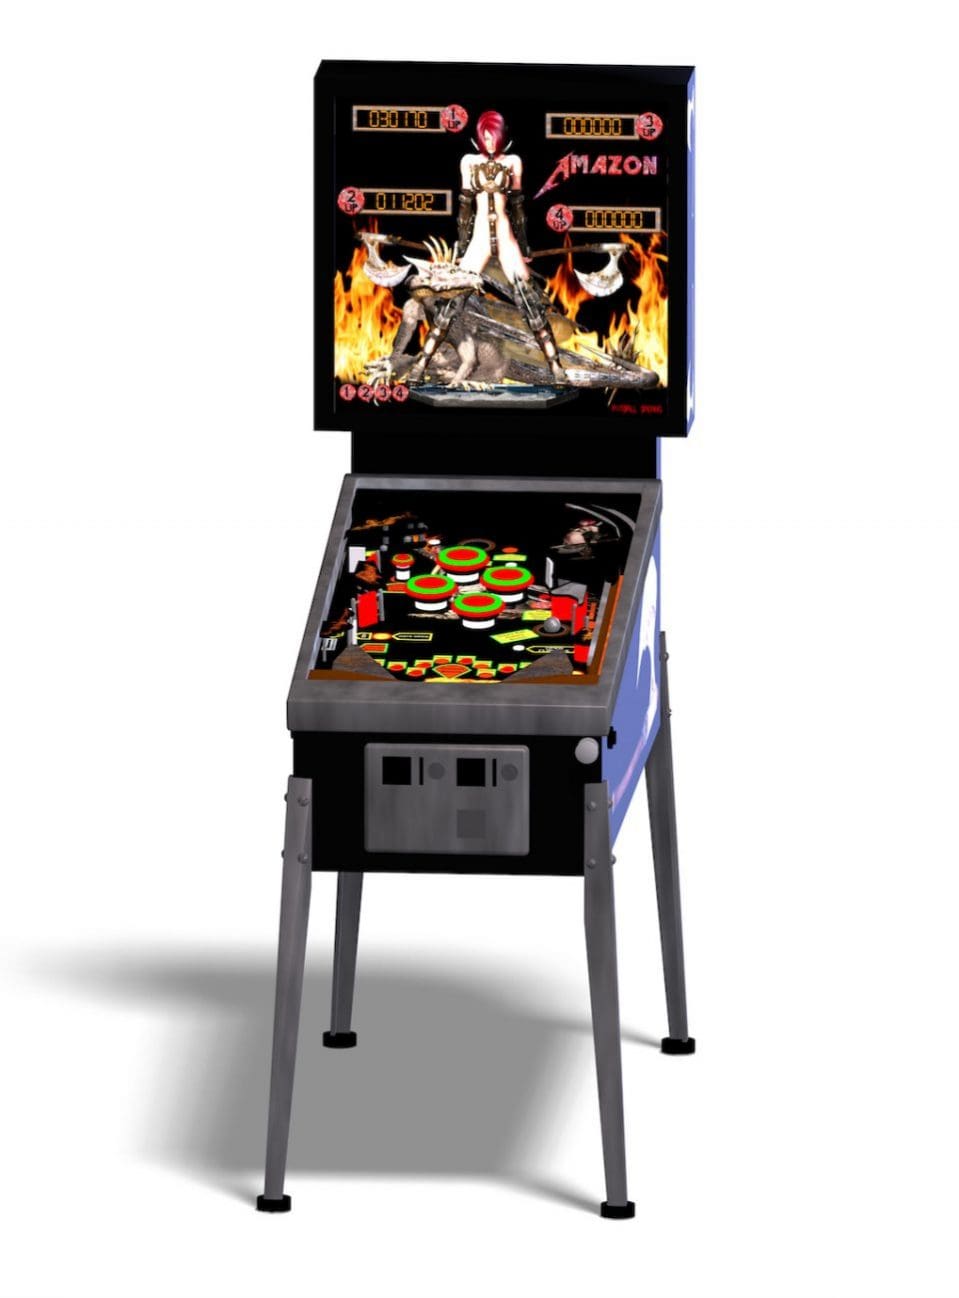 3D rendering of a pinball with clipping path and shadow over white